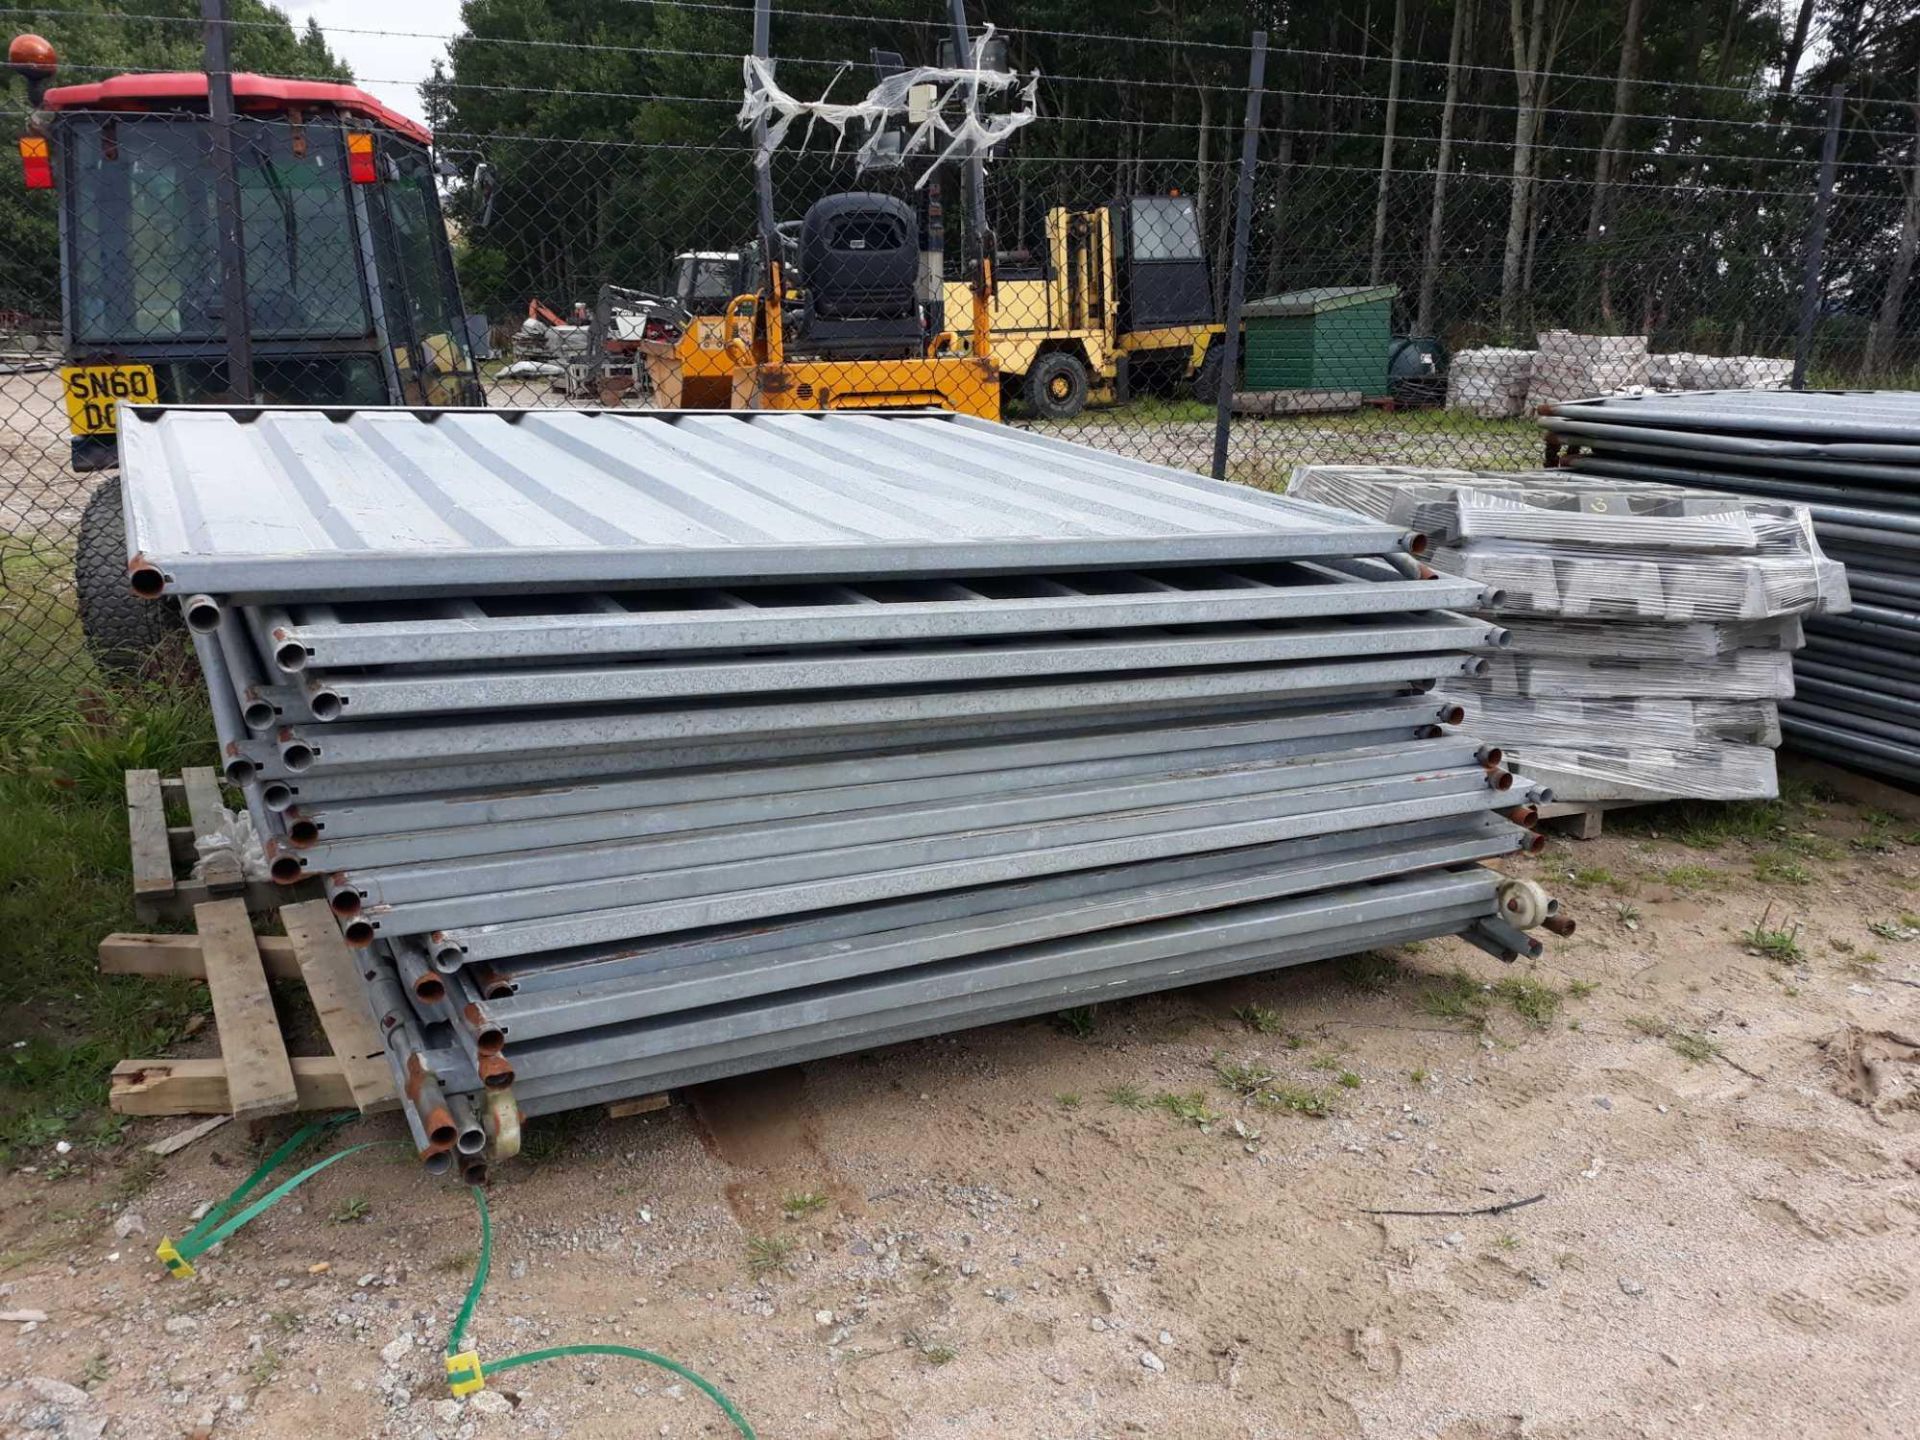 23 APPROX STEEL SHEET FENCE PANELS AND FEET